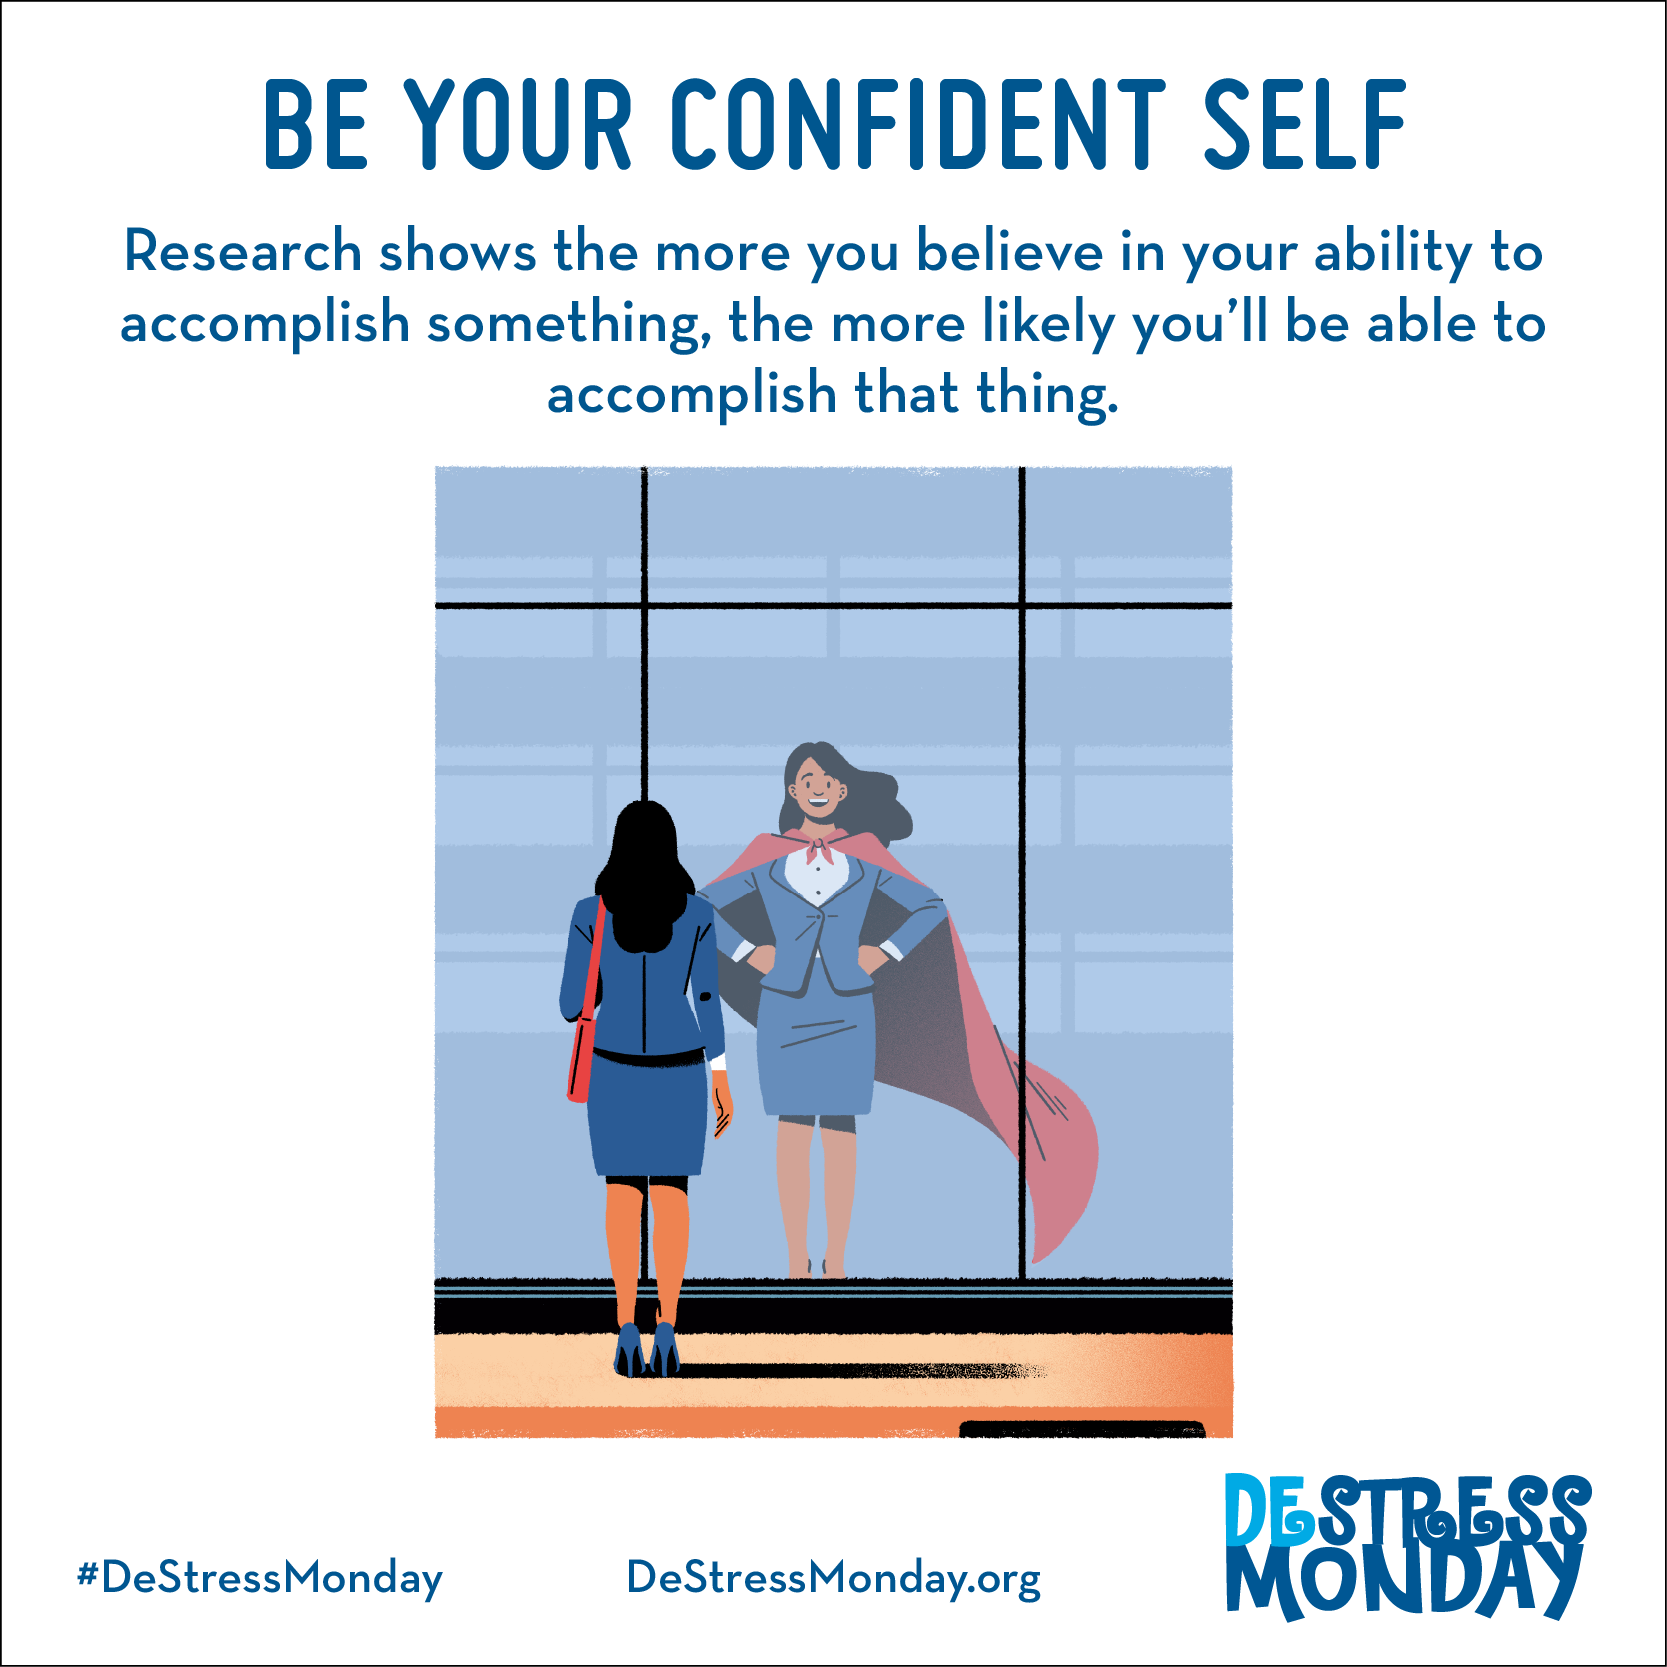 Be your confident self. Research shows the more you believe in your ability to accomplish something, the more likely you’ll be able to accomplish that thing.